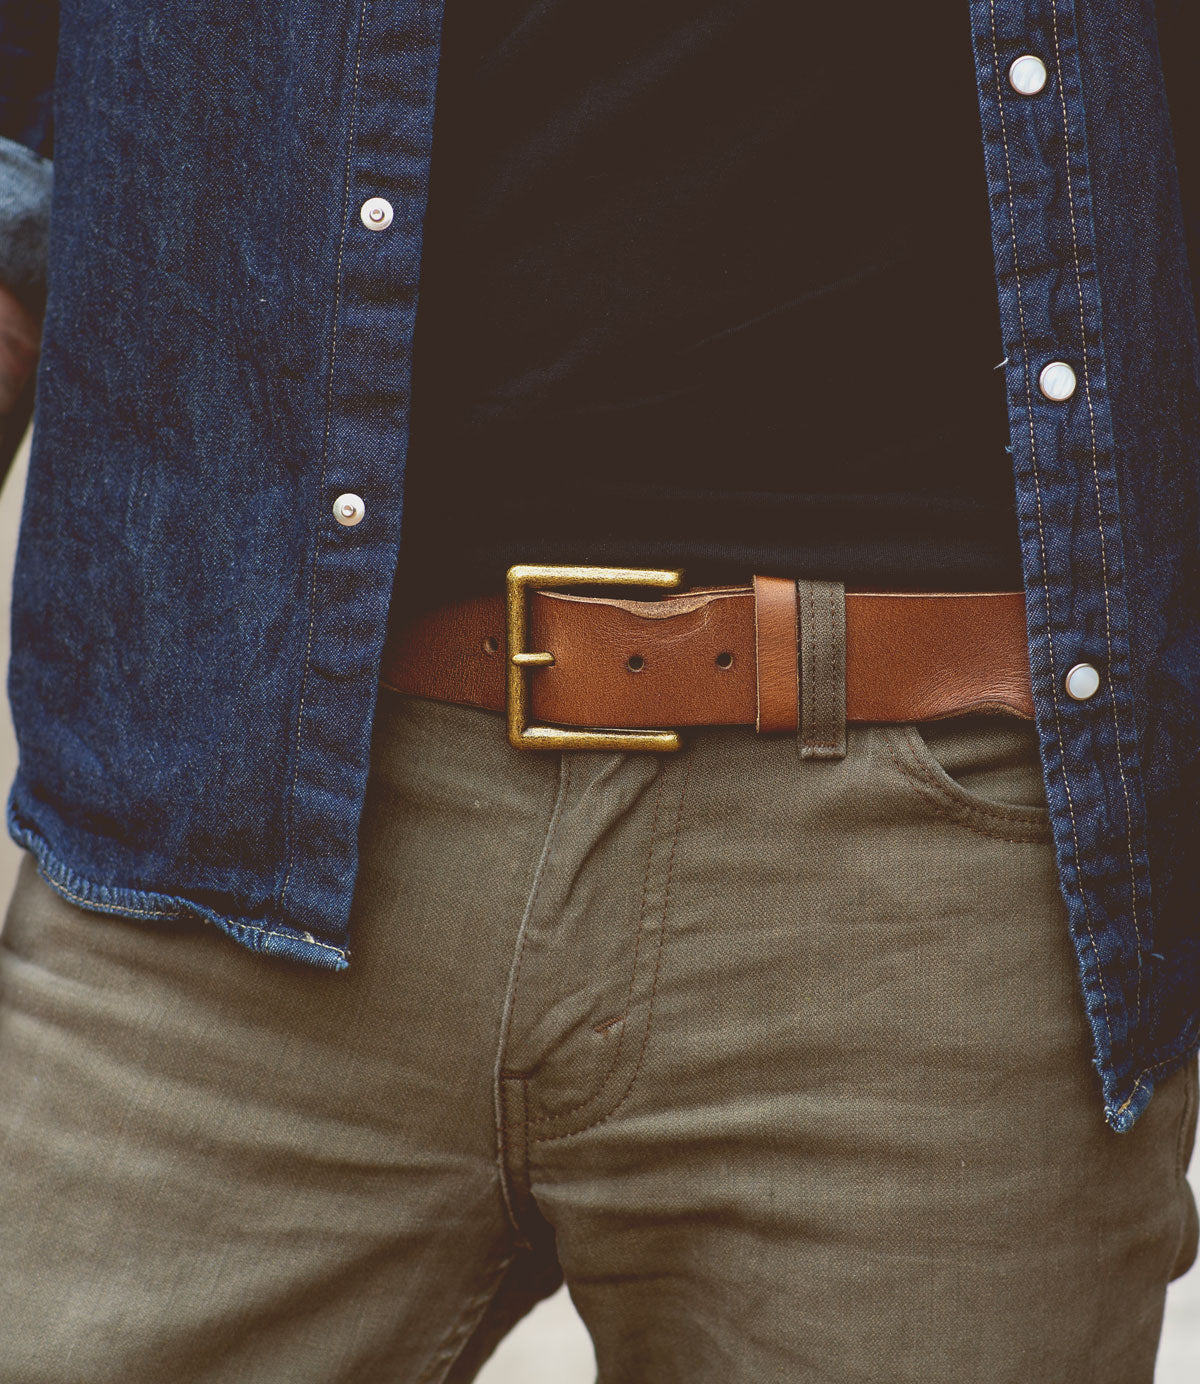 Close-up of a person wearing a blue denim shirt, olive-green pants, and an unisex brown leather belt with a removable metal buckle (Alex by Bed Stu), with one hand in a pocket.